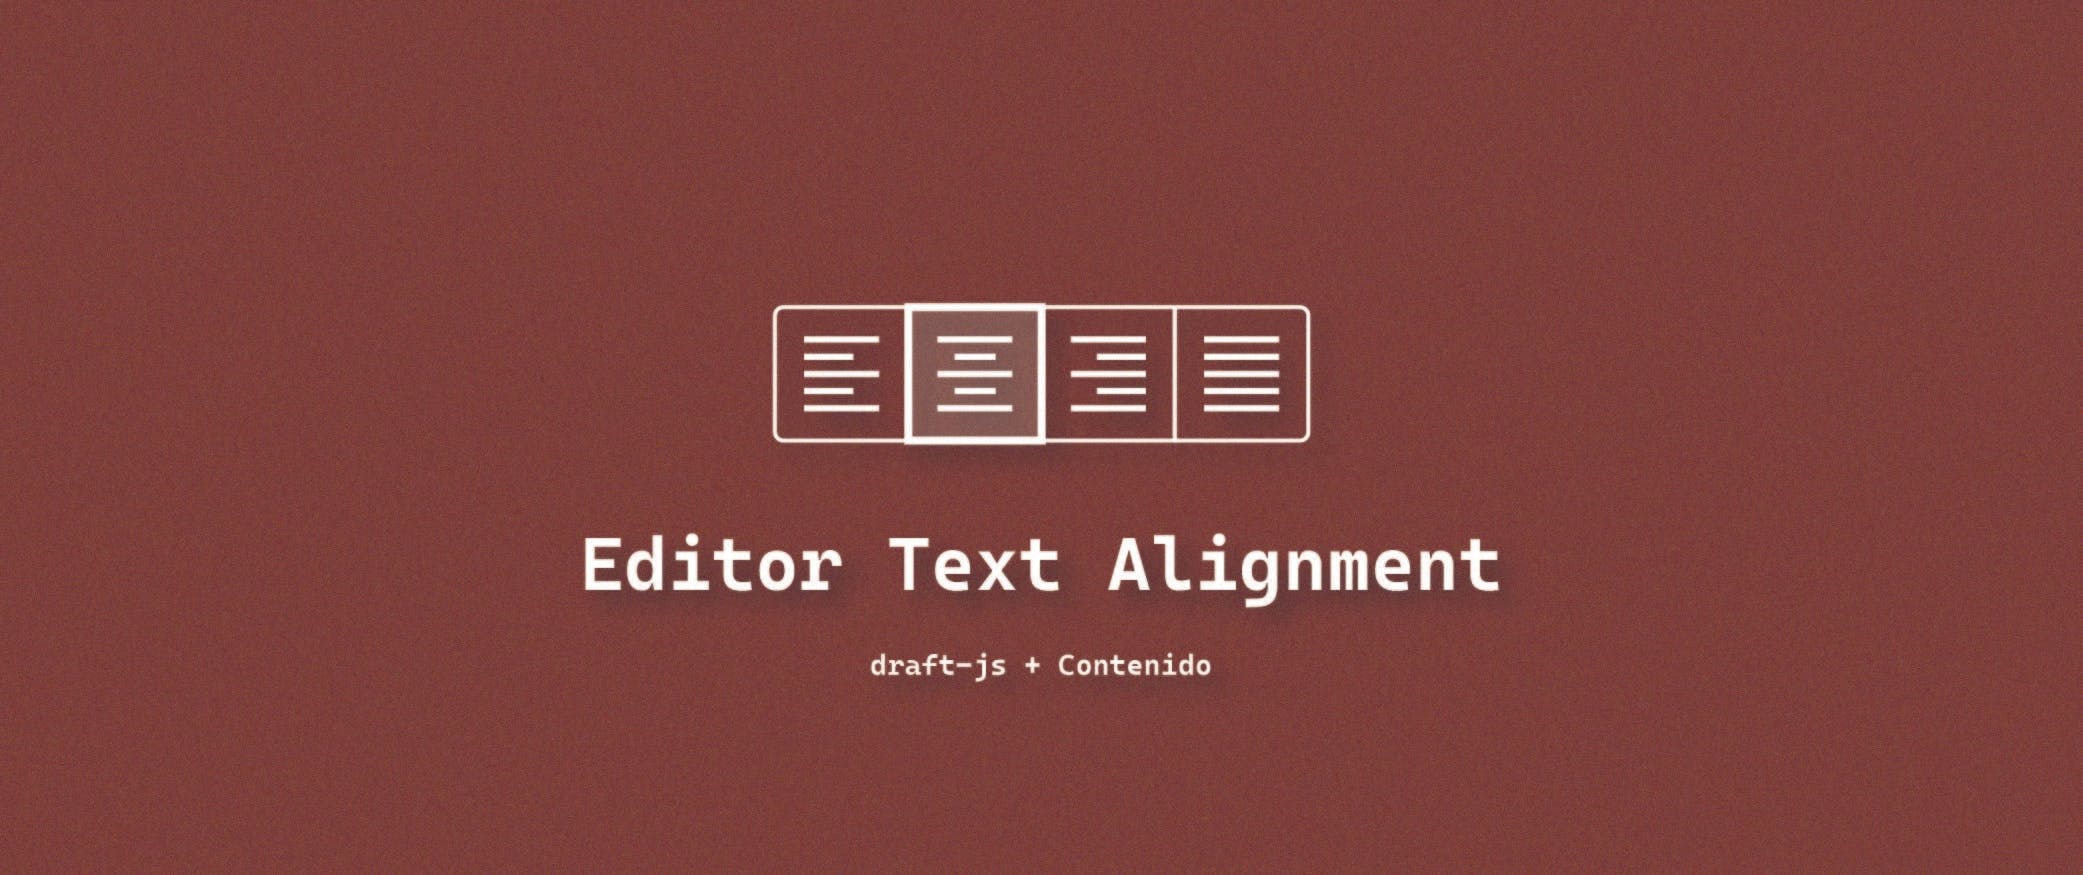 Draft-js text alignment in less than 5 minutes